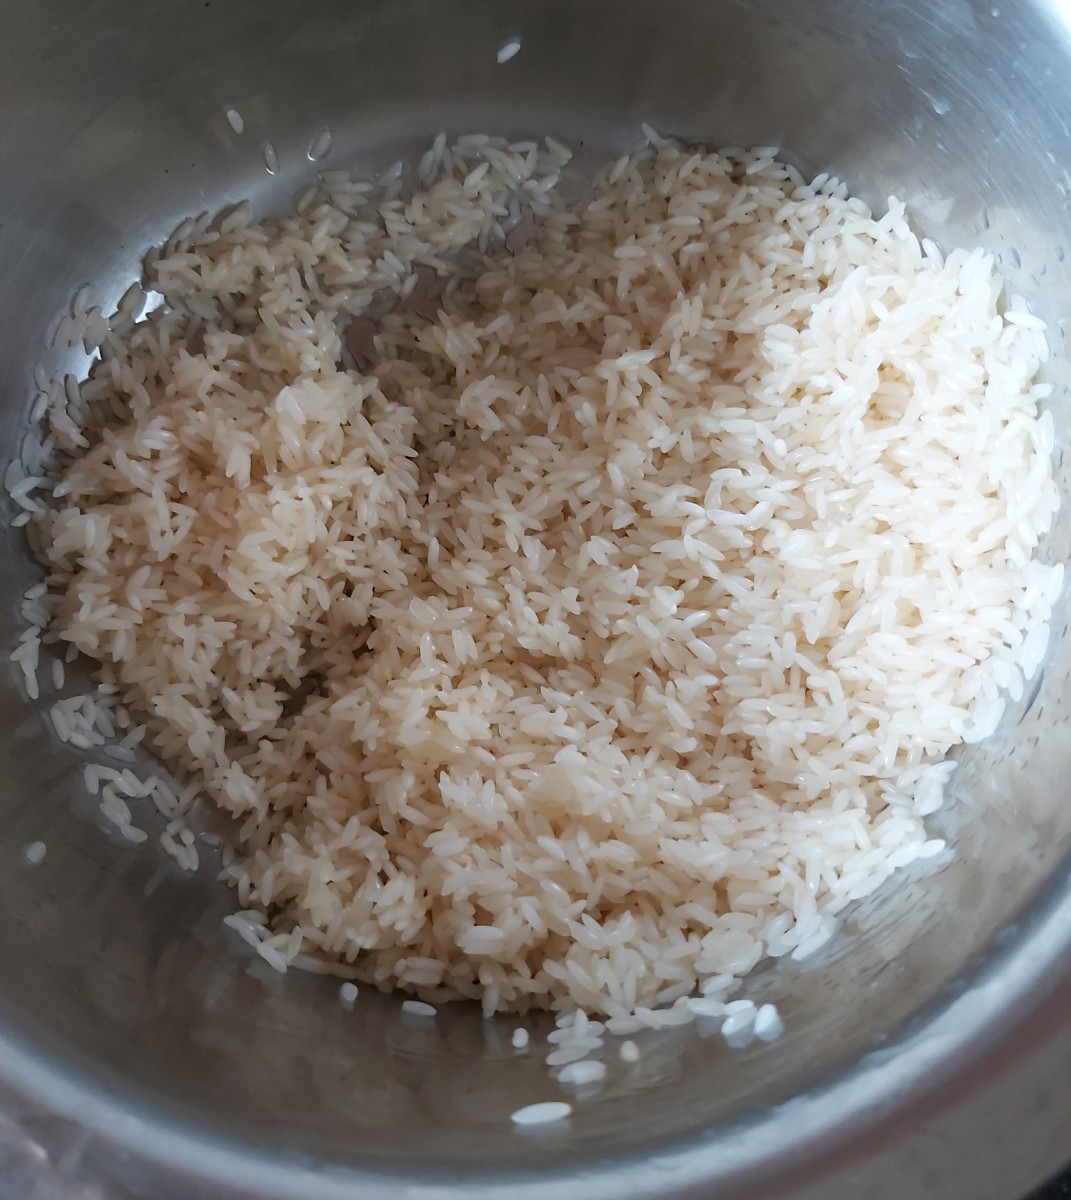 Wash rice properly 2-3 times. Set aside (you can soak rice for 10-15 minutes to save cooking time).